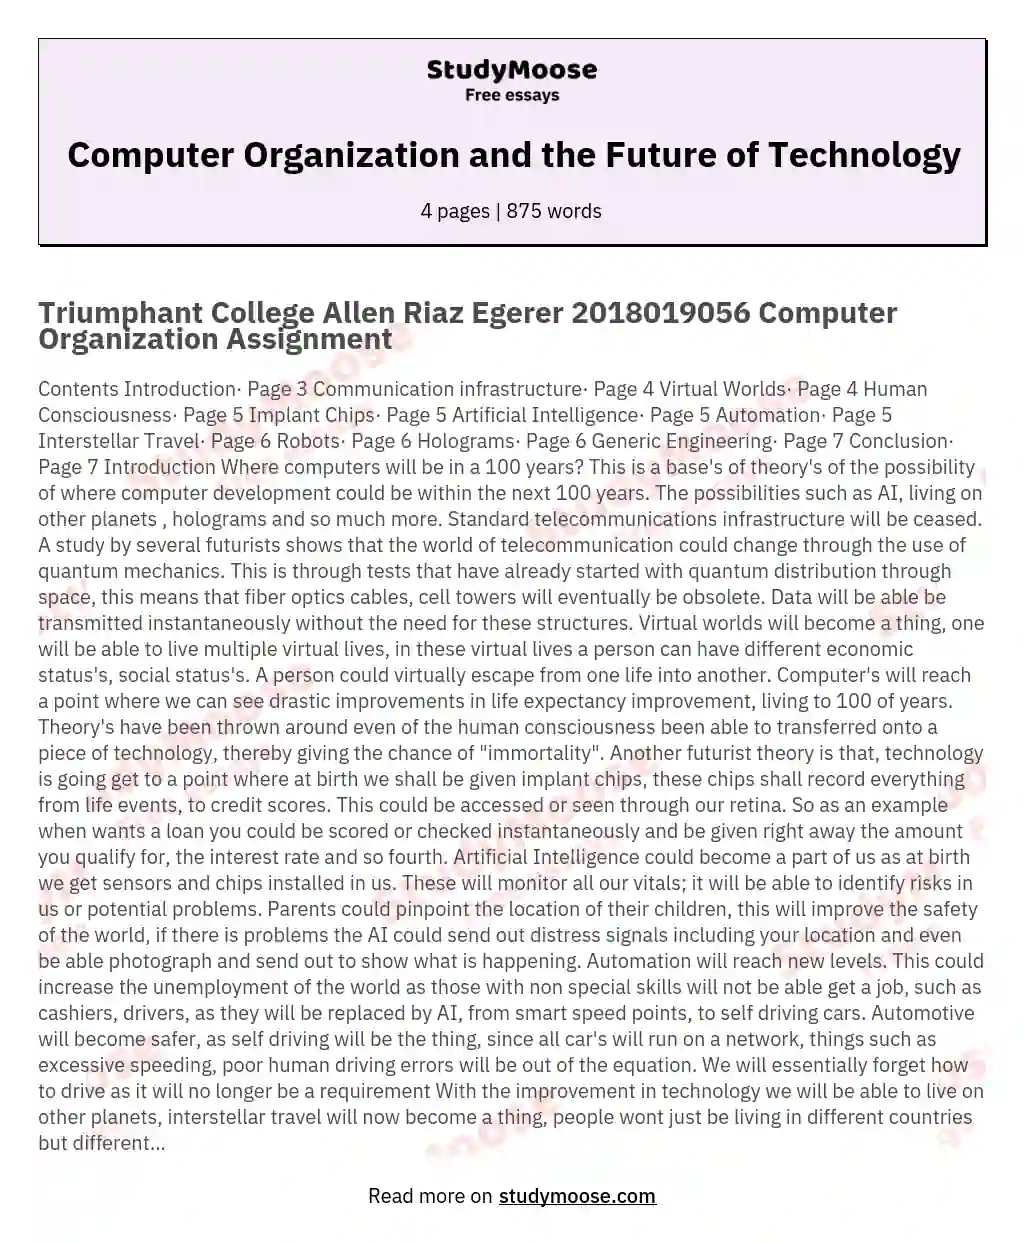 Computer Organization and the Future of Technology essay